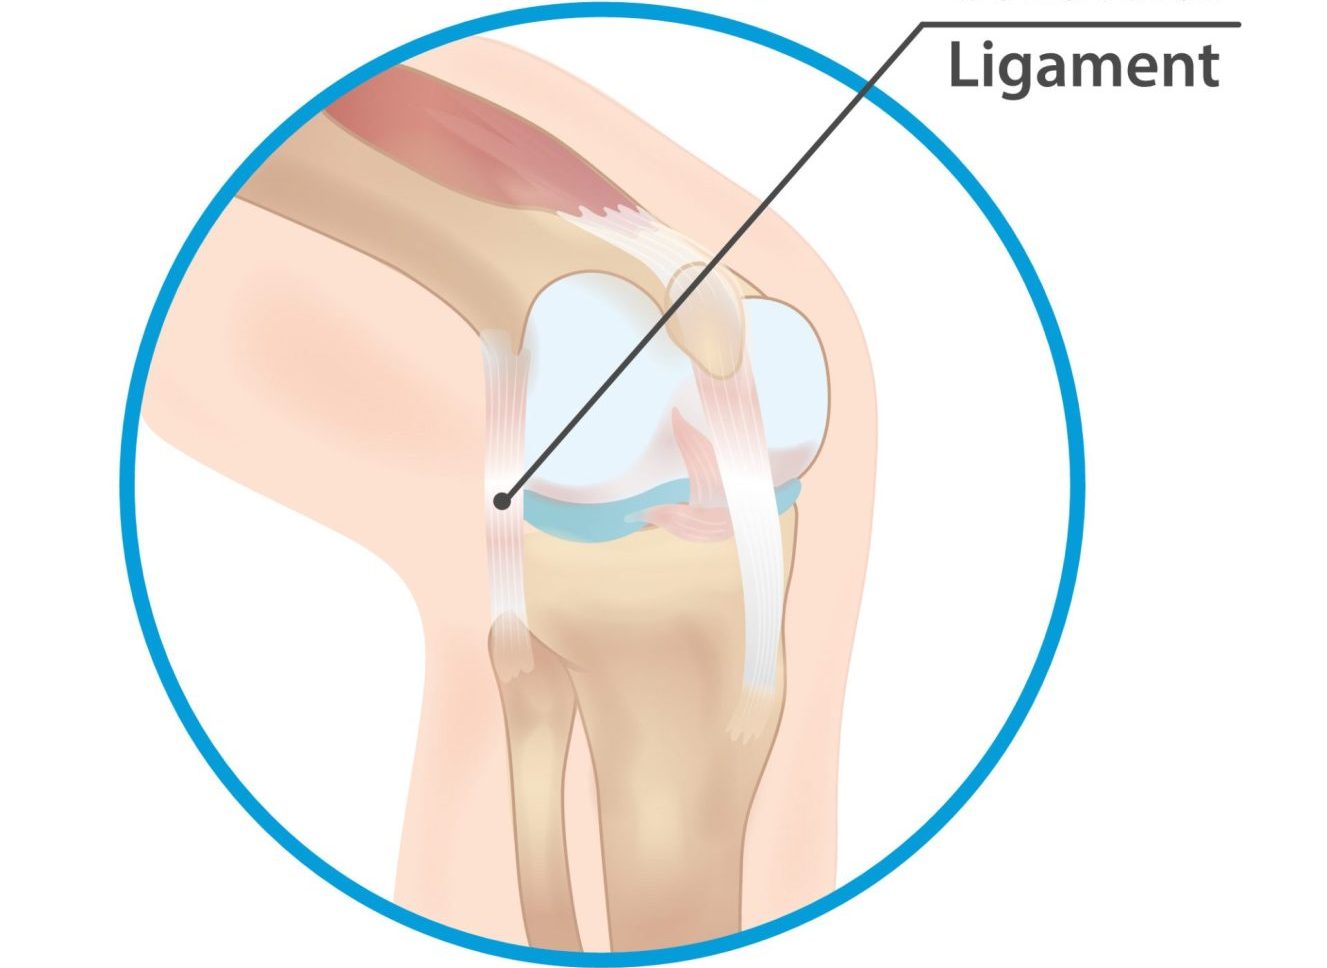 Lateral collateral ligament (LCL) injury